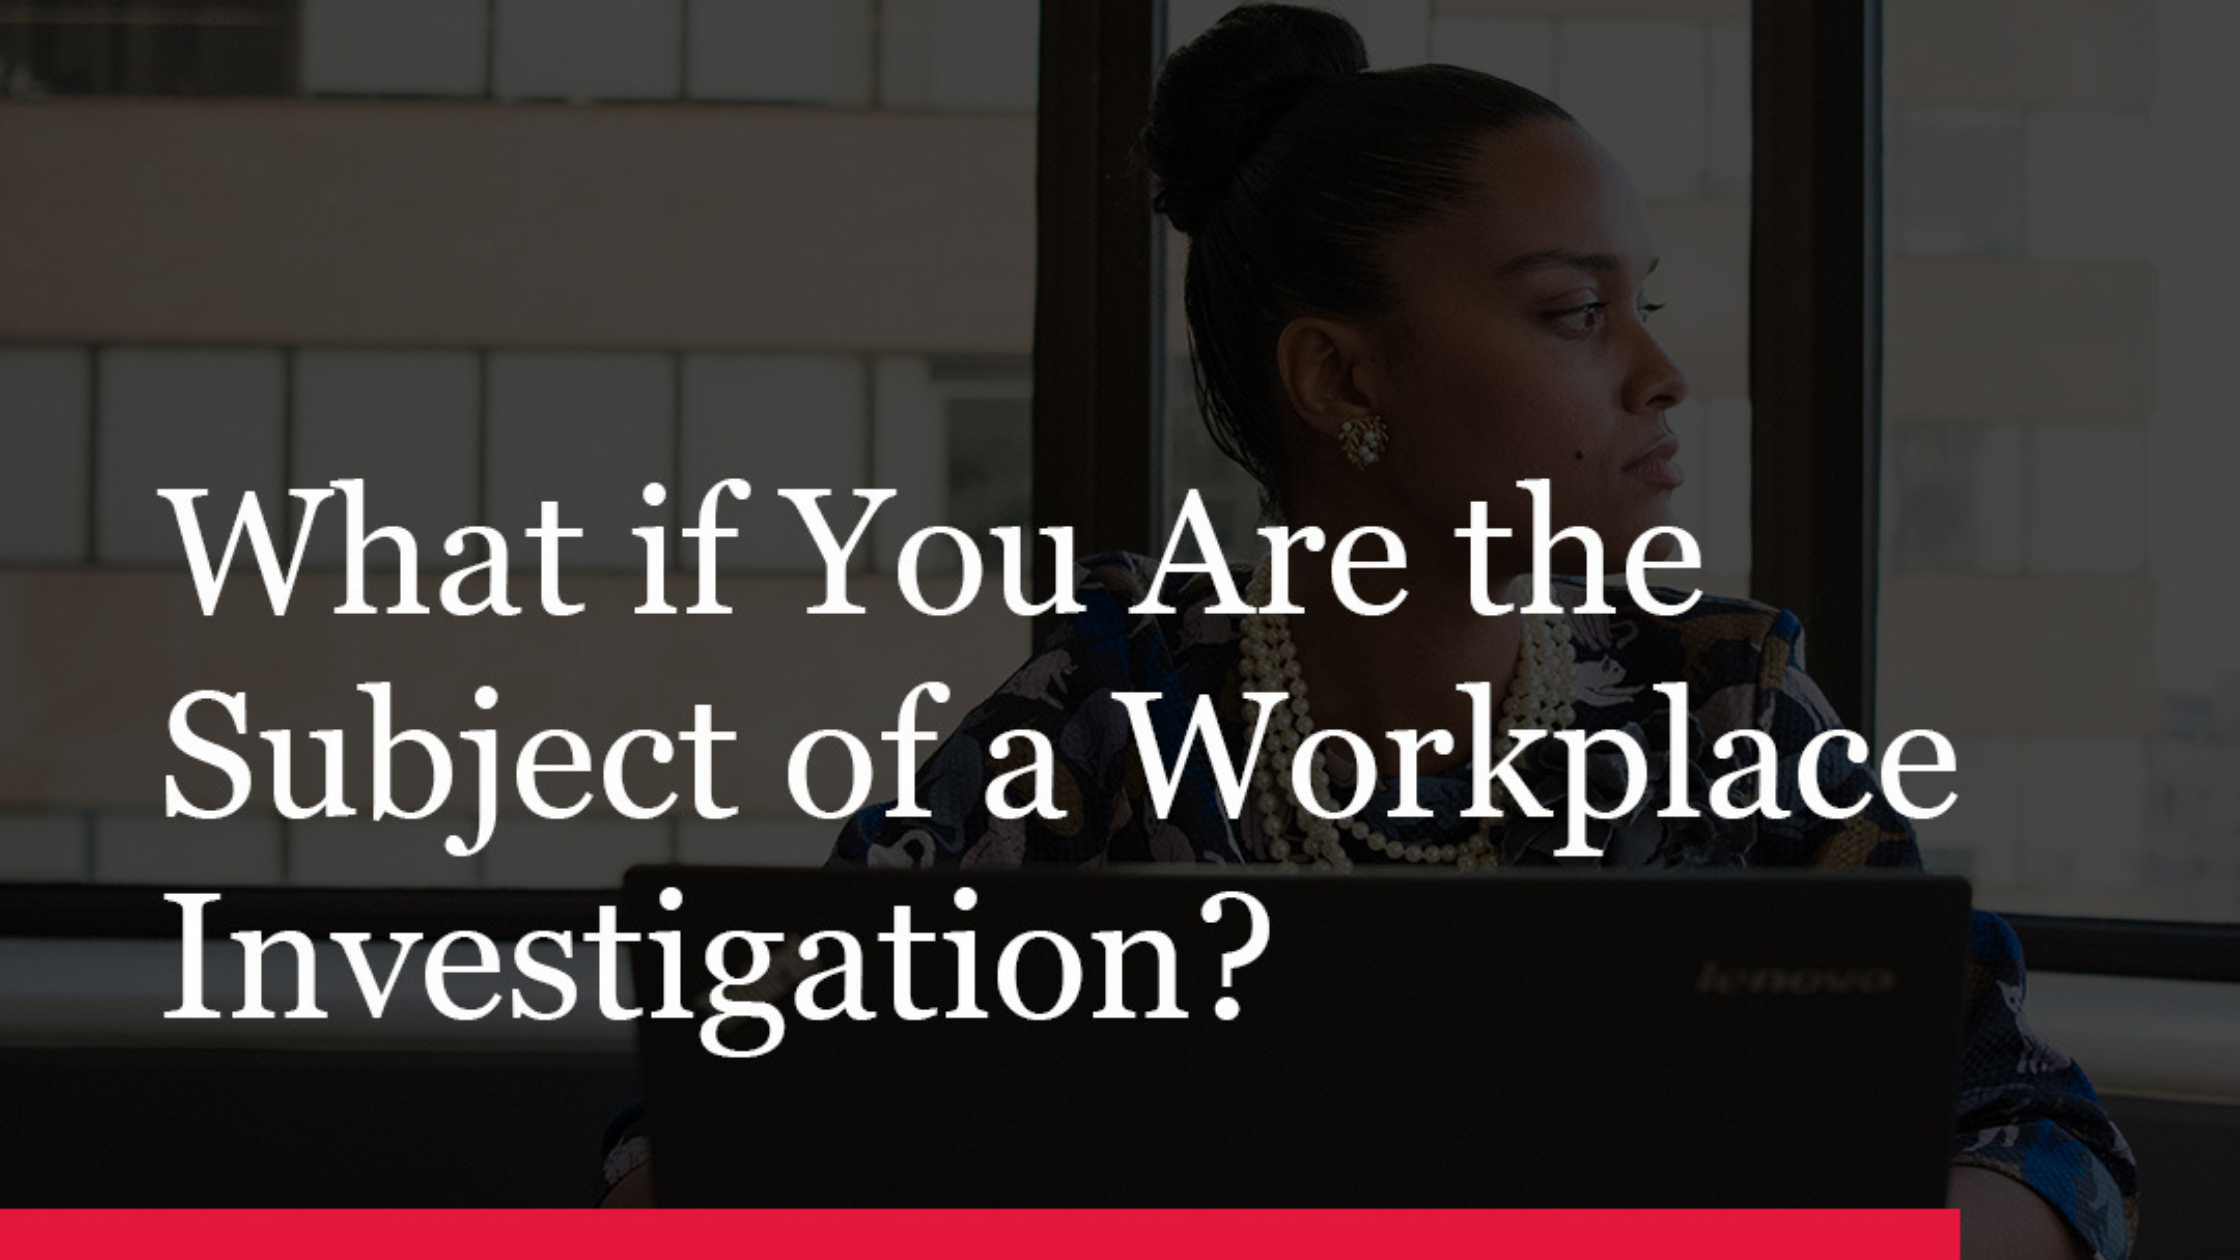 Subject of a workplace investigation